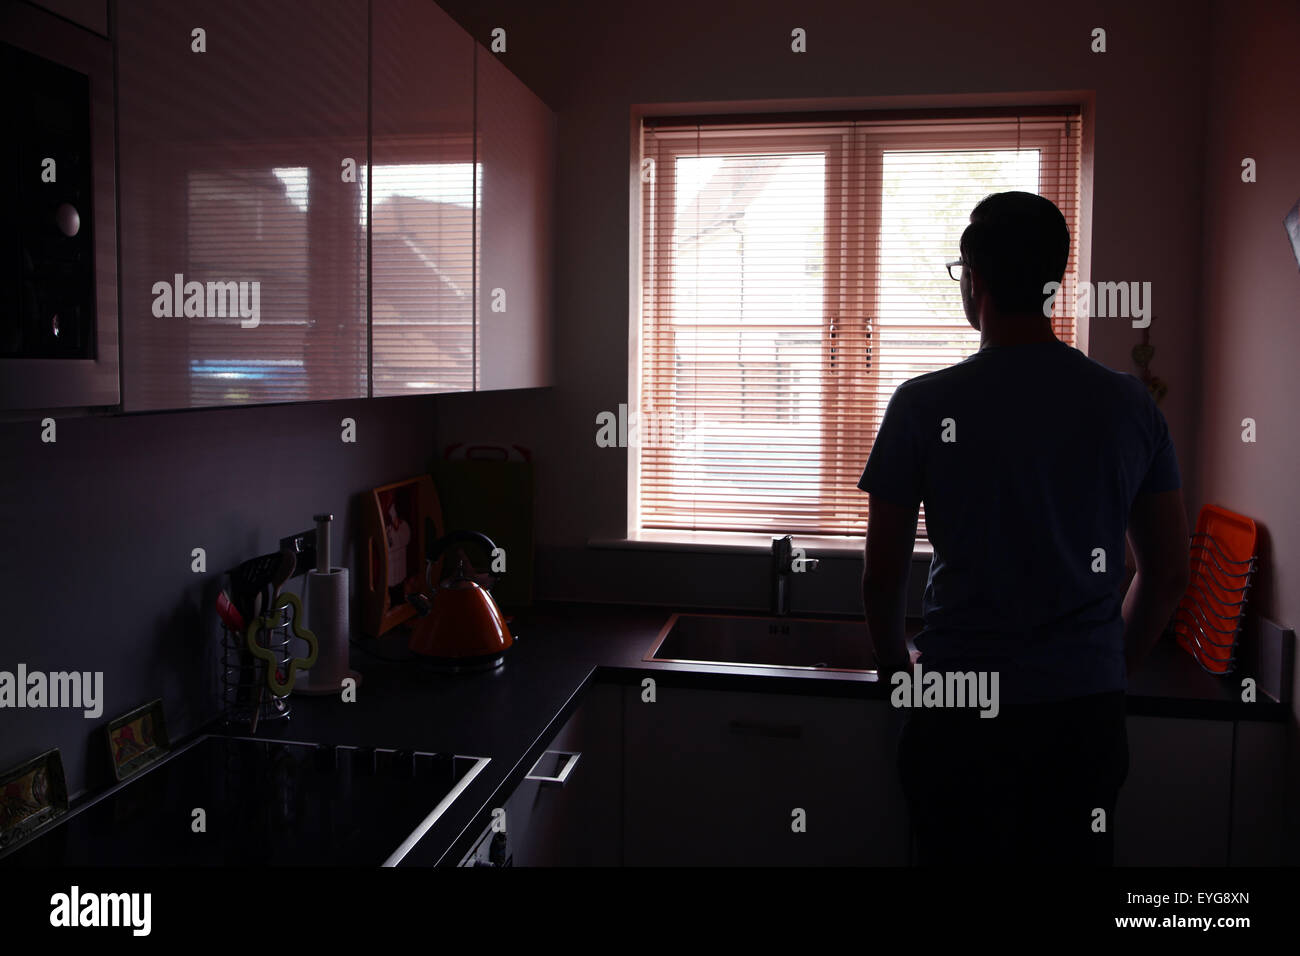 Young man in a kitchen looking out through a window blind. Landscape shape. Stock Photo